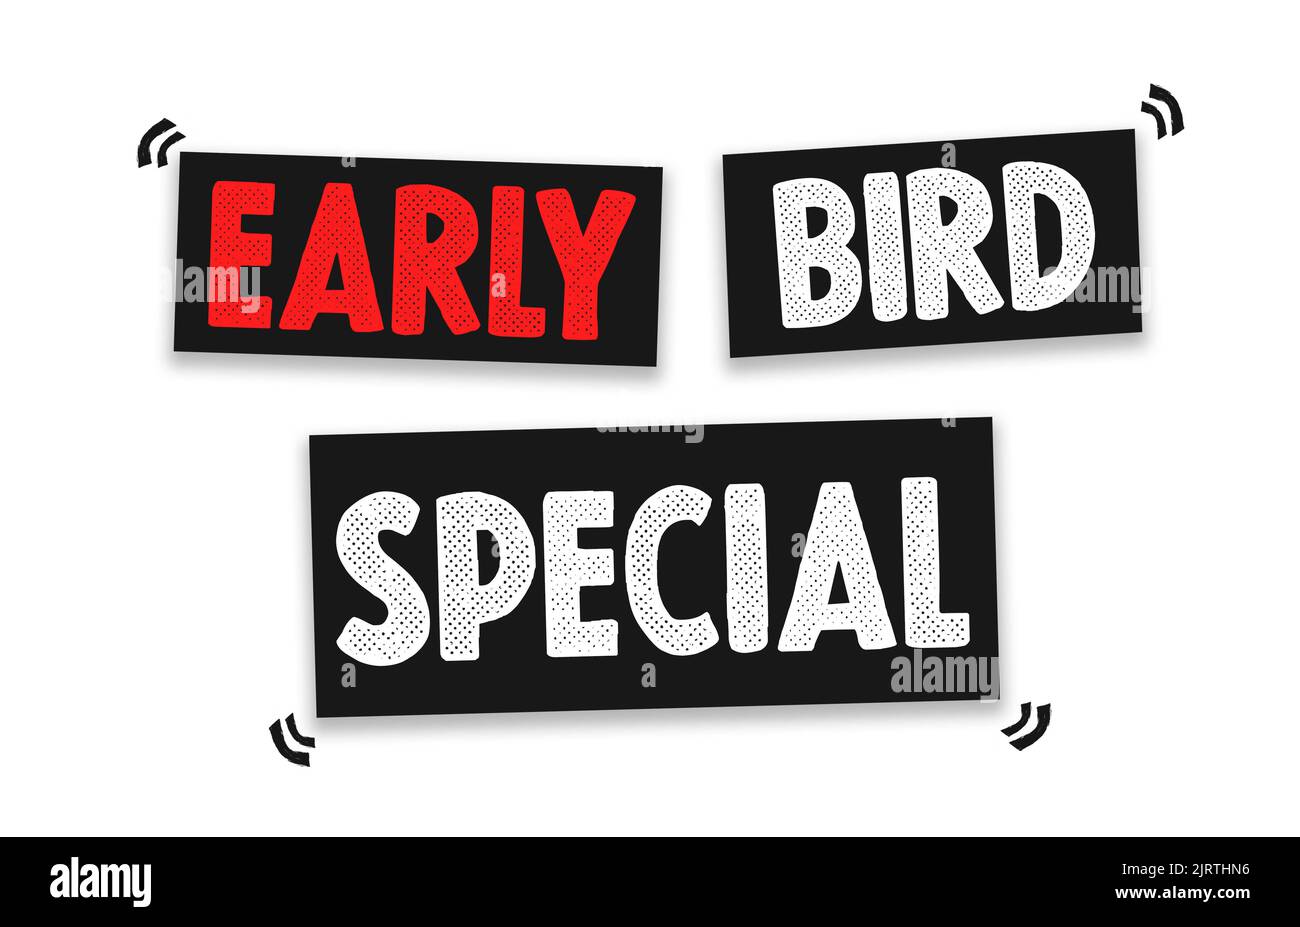 Early Bird Special - customer offer Stock Photo